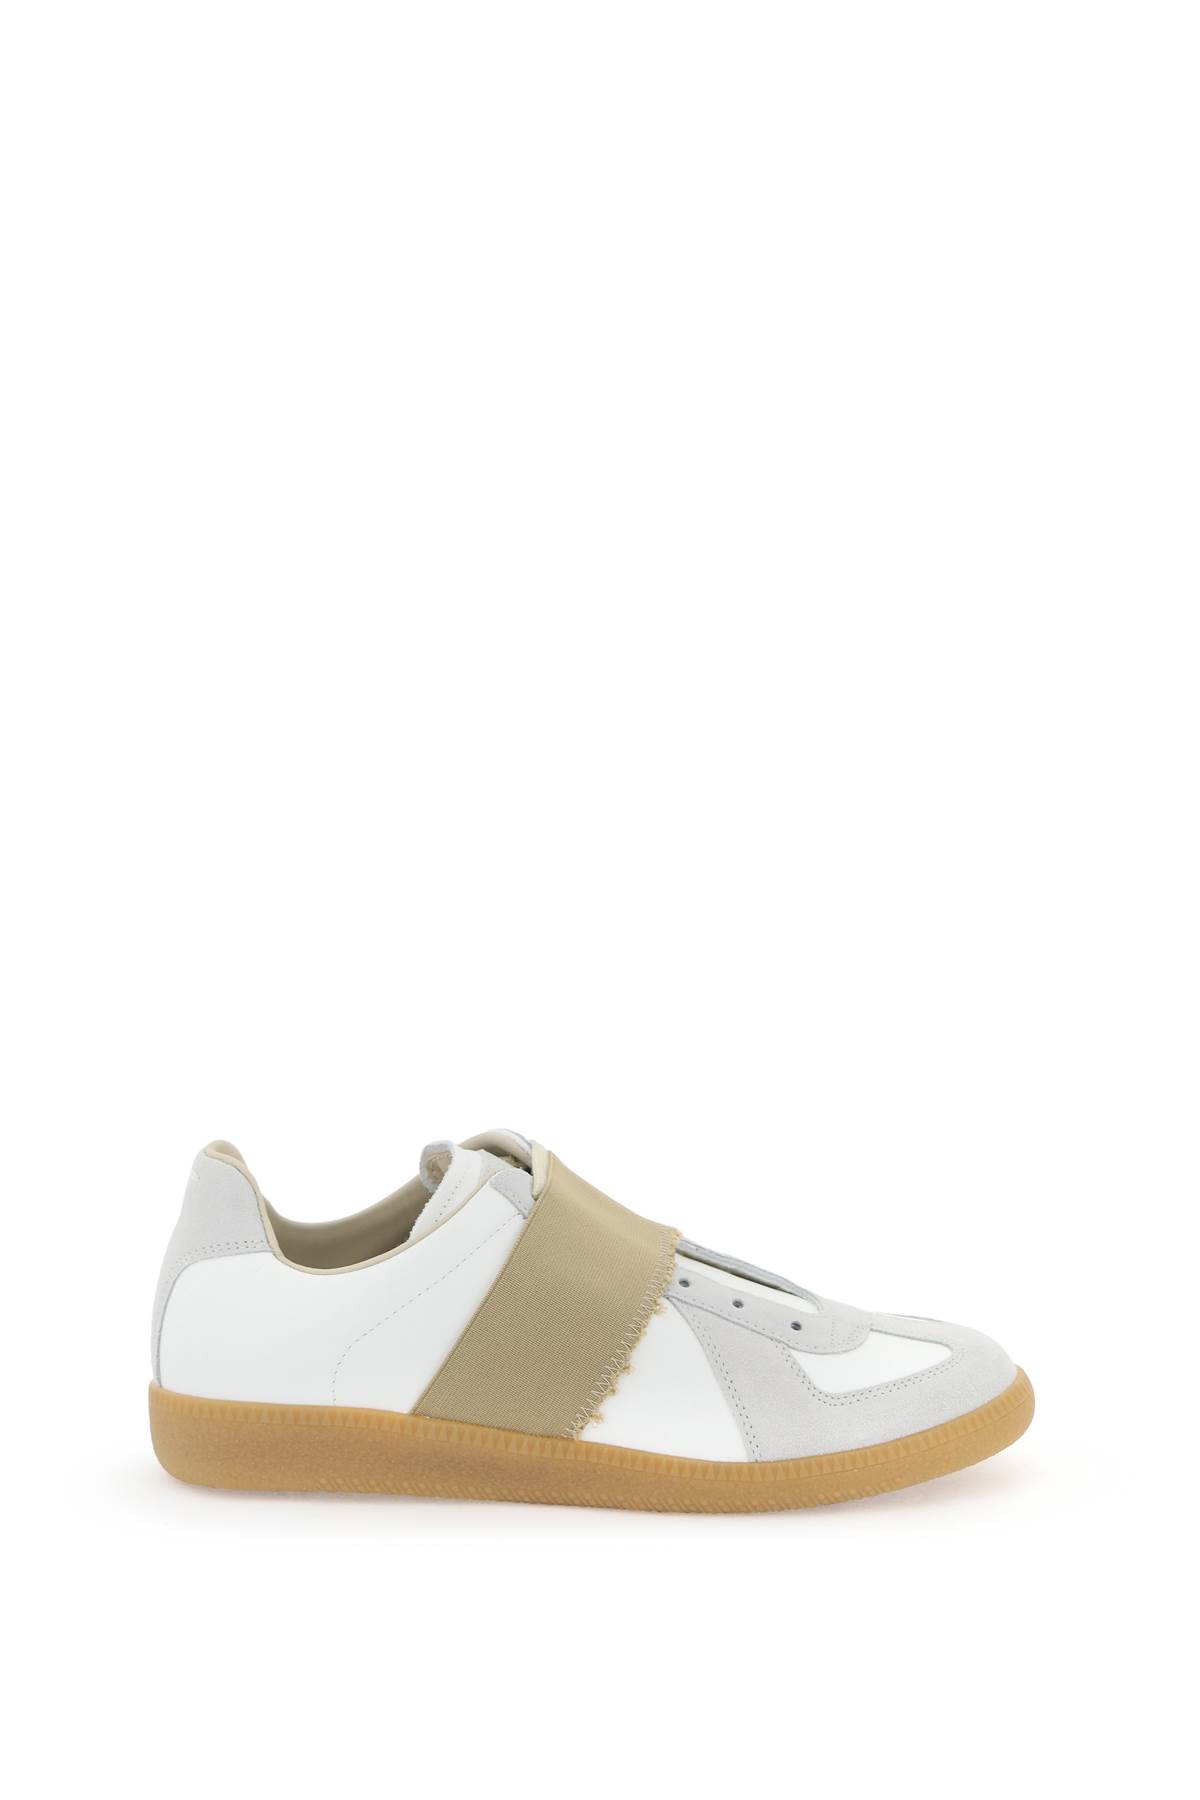 Shop Maison Margiela Replica Sneakers With Elastic Band In White Nude (white)